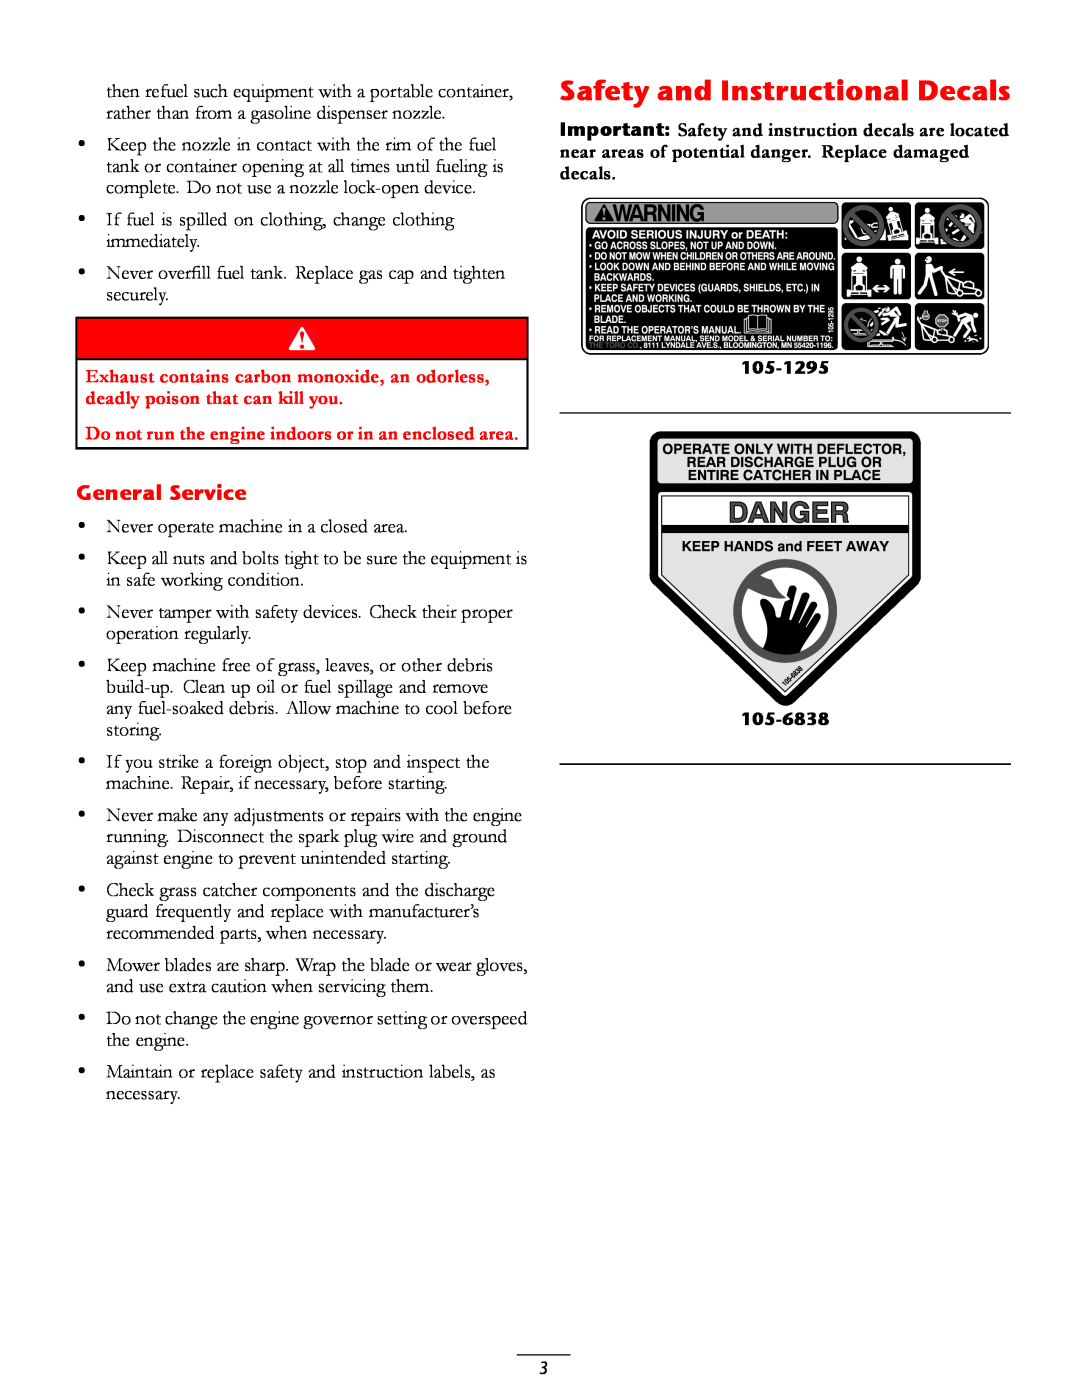 Toro 20016 owner manual Safety and Instructional Decals, General Service 